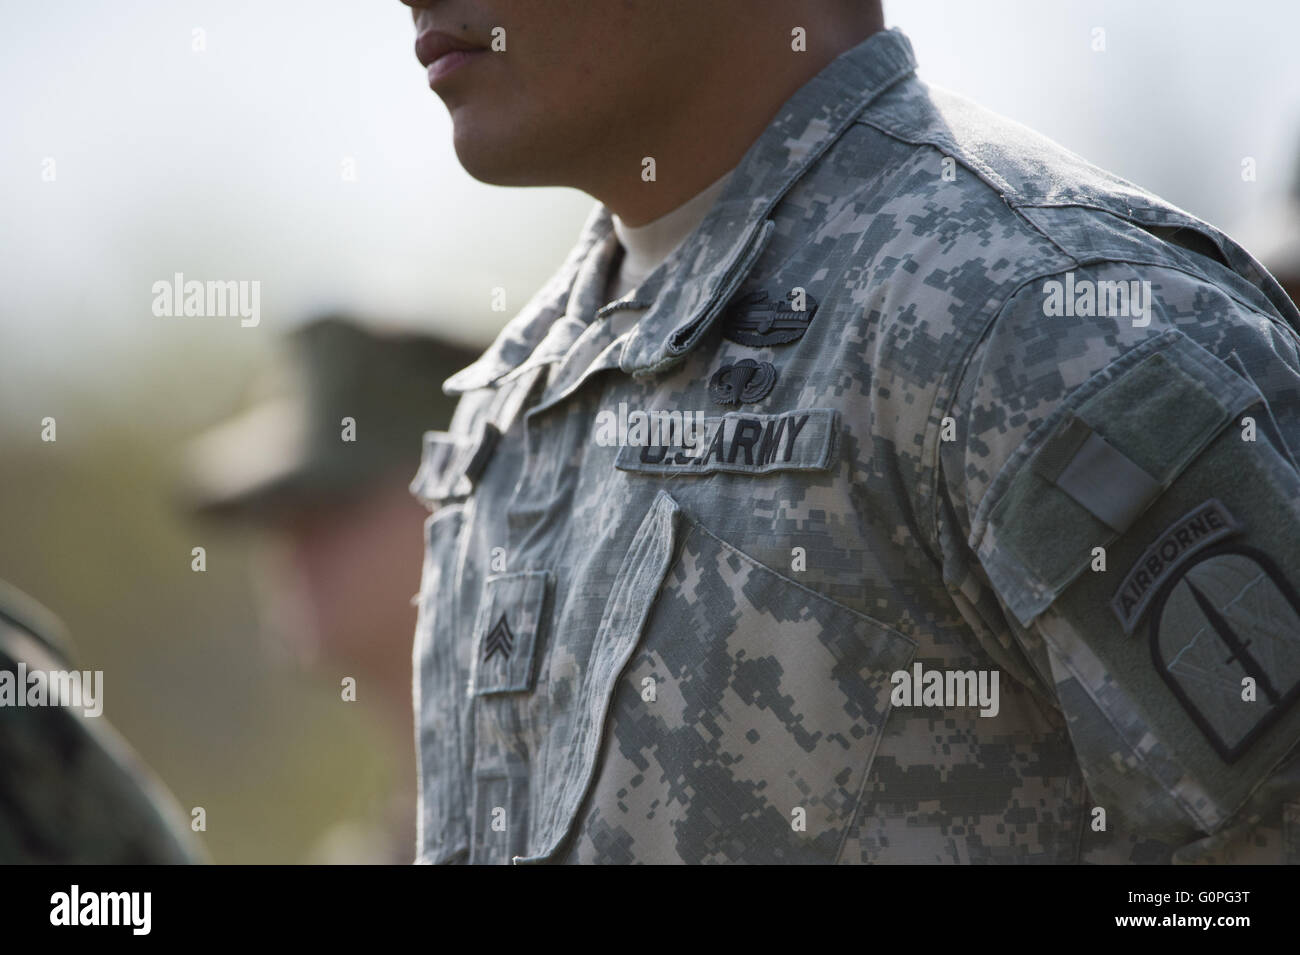 Stuttgart, Germany. 03rd May, 2016. A soldier of the U.S. Army pictured during the change in command at the United States European Command (EUCOM), at the Patch Barracks in Stuttgart, Germany, 03 May 2016. Photo: MARIJAN MURAT/dpa/Alamy Live News Stock Photo